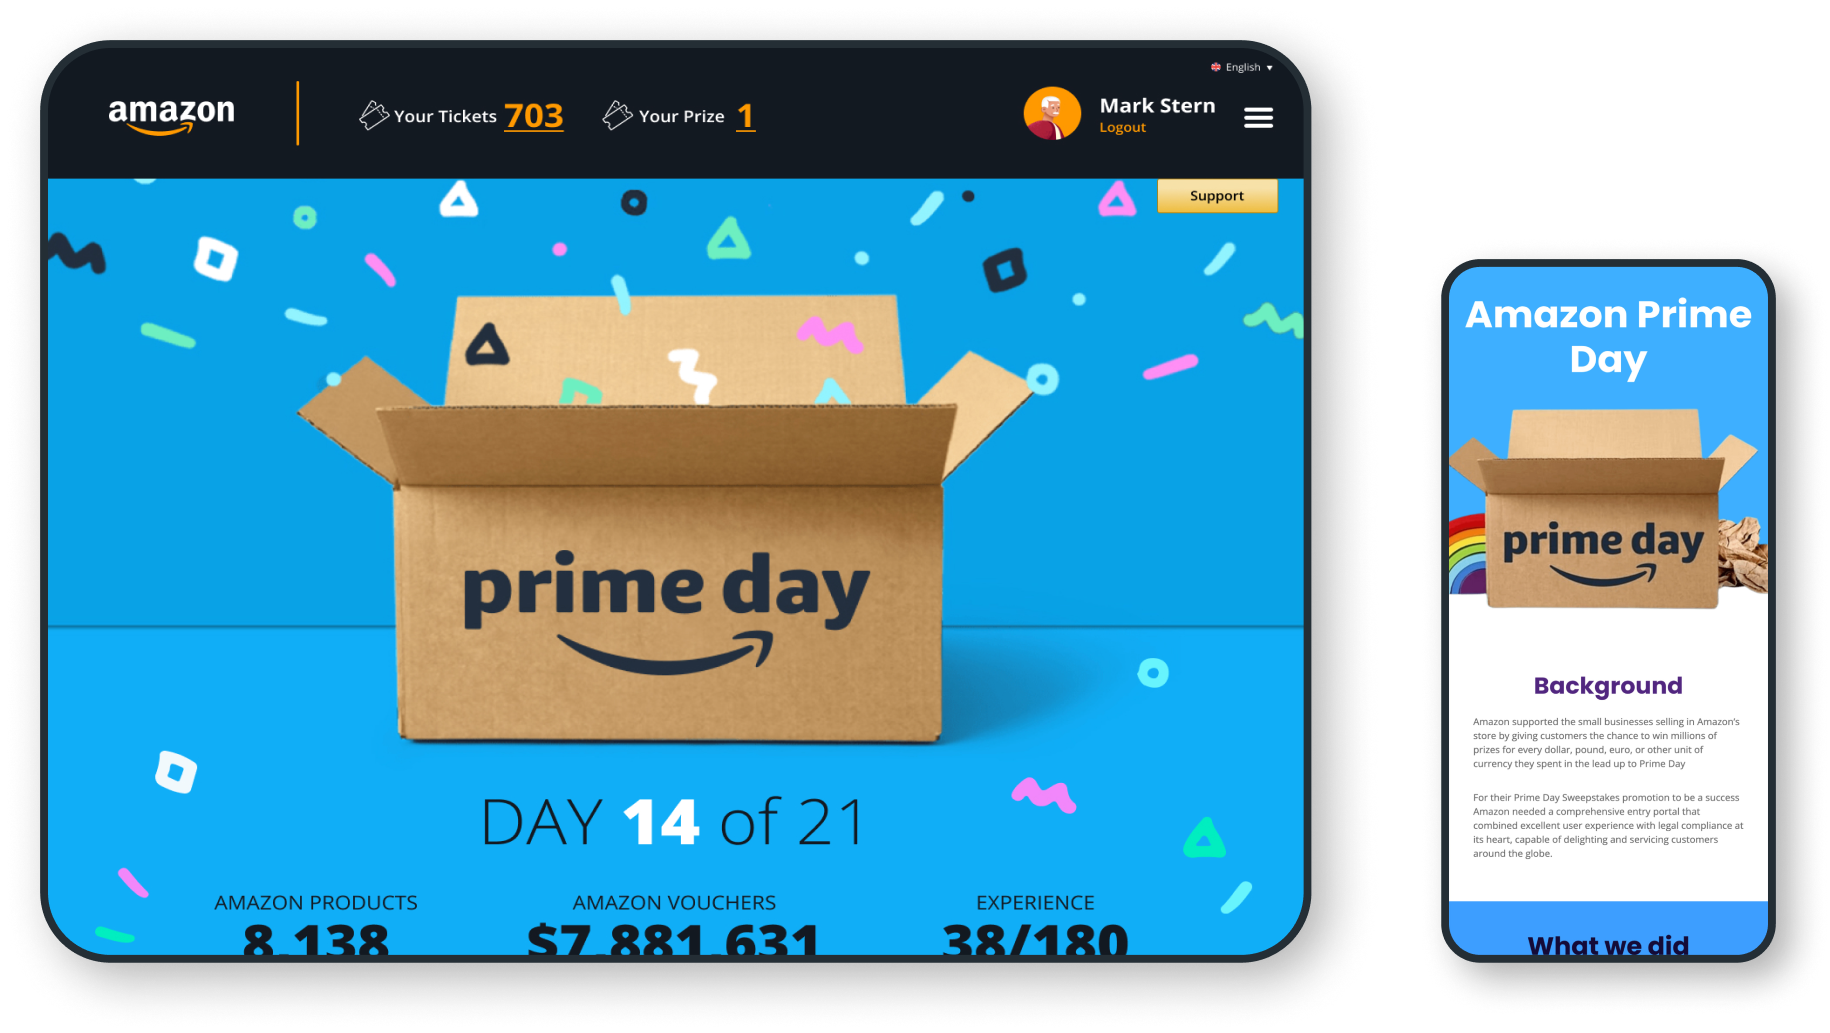 Tablet and mobile devices showing amazon website on prime day